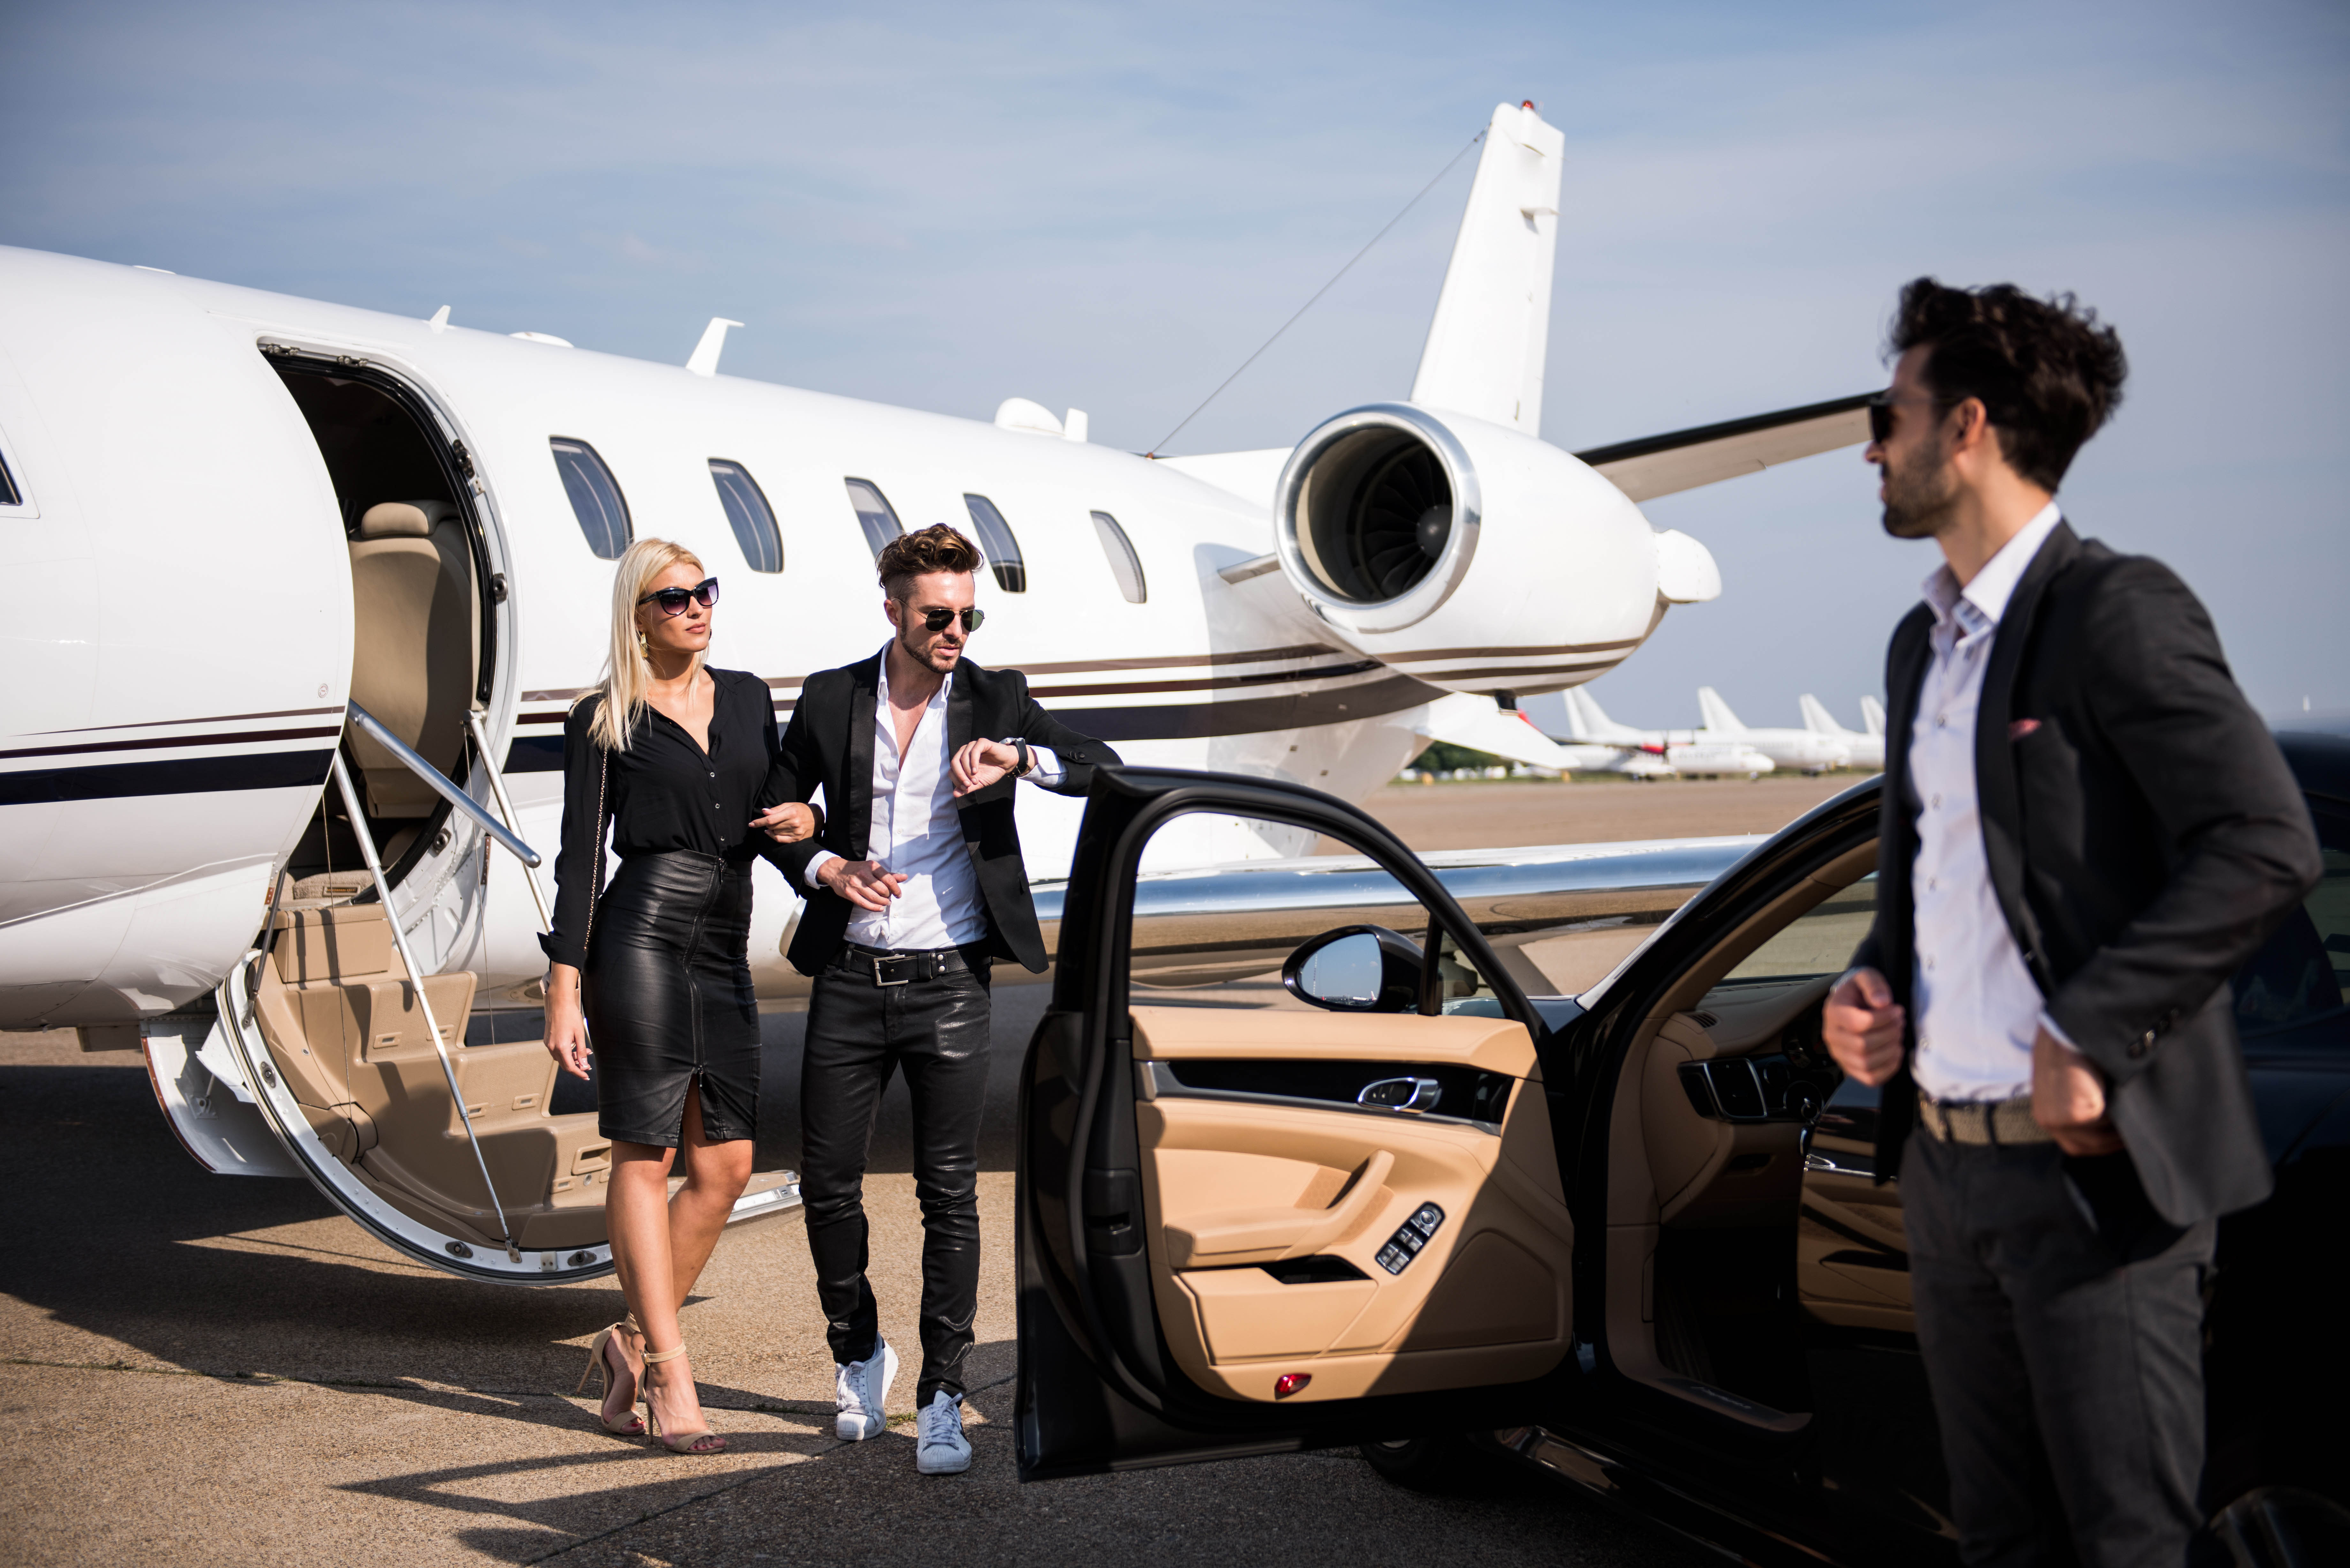 Ranked: The Top 20 Countries With the Most Ultra-Wealthy Individuals